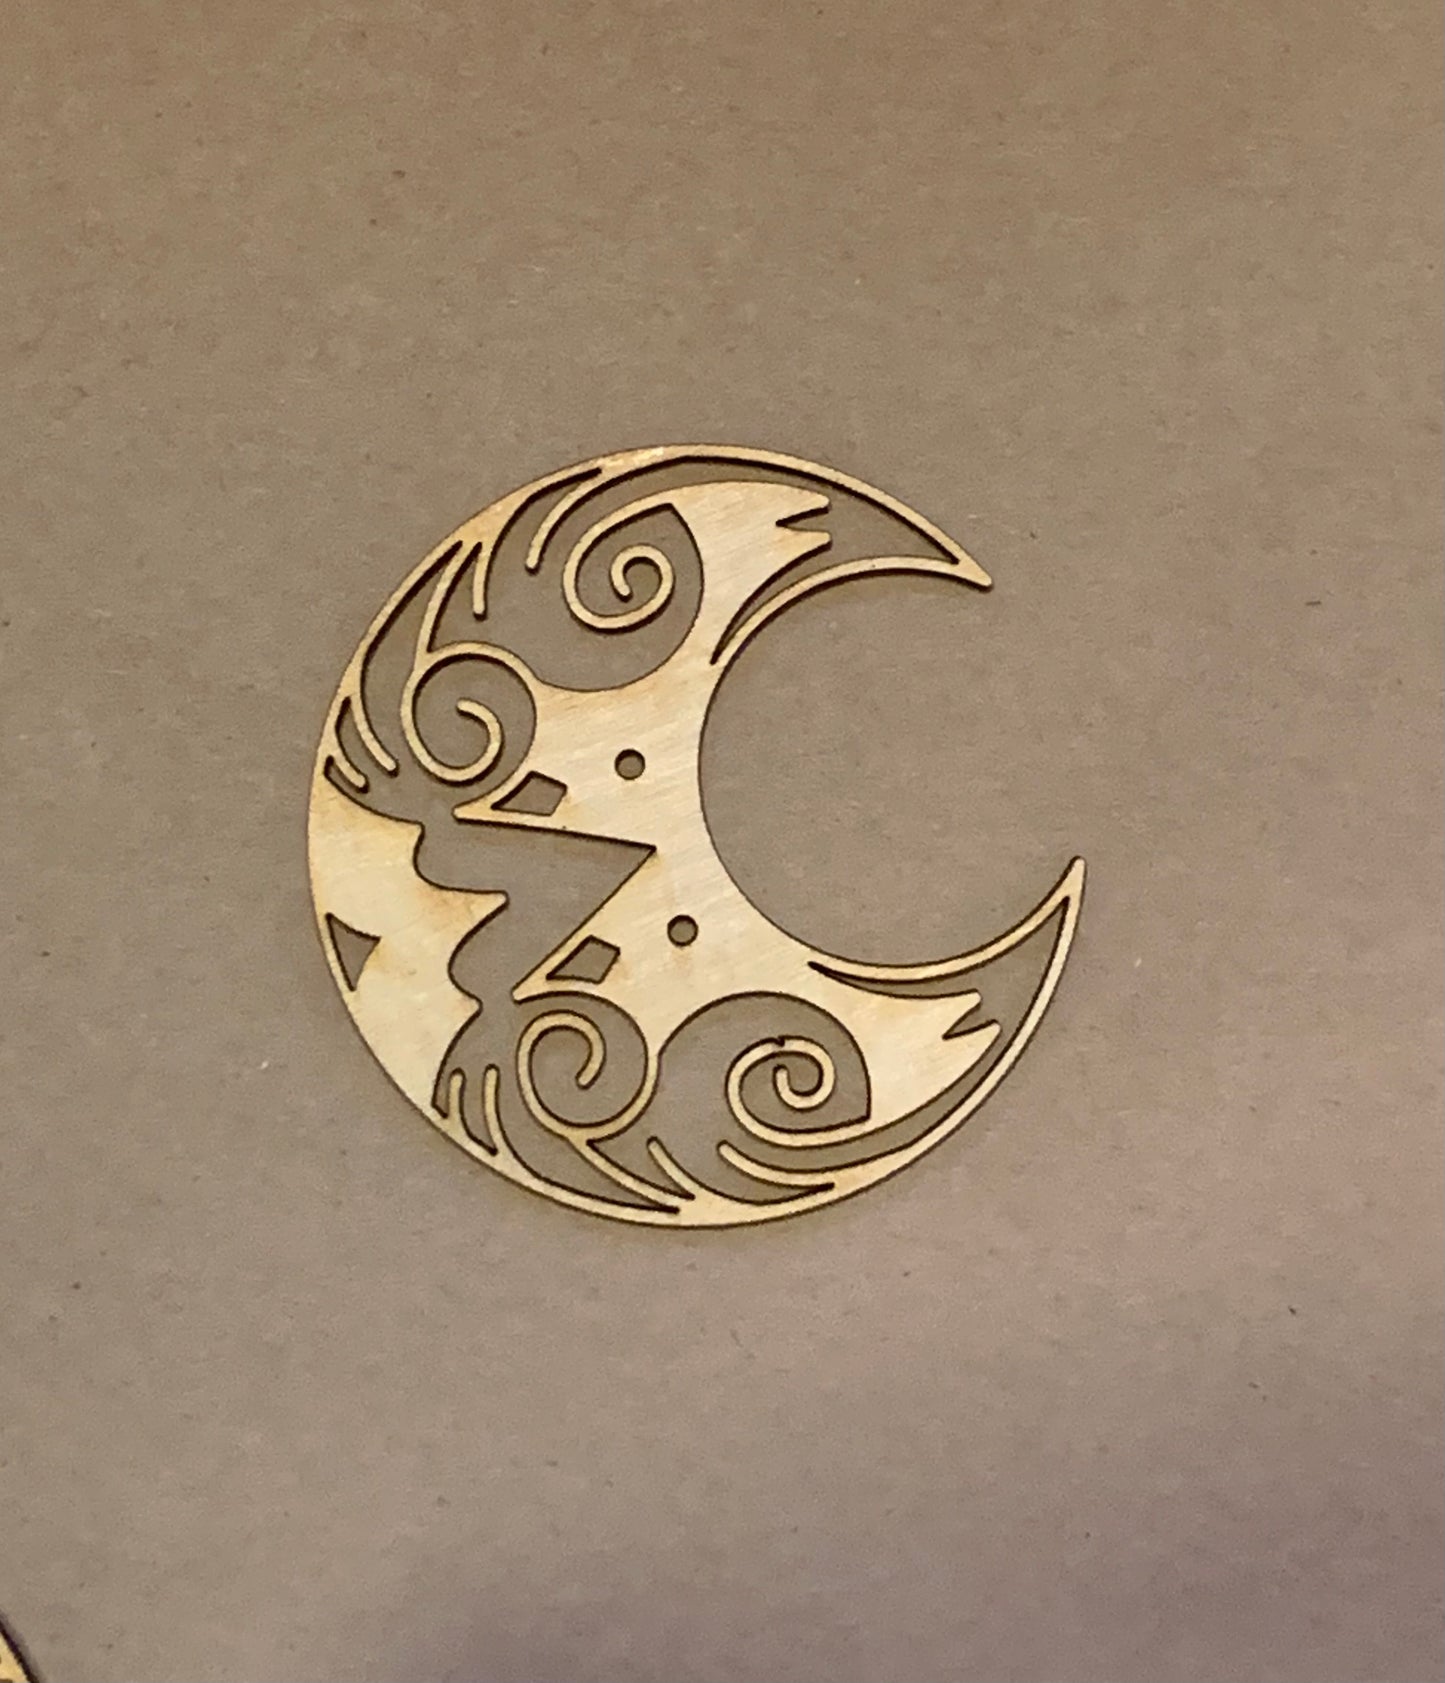 Set of 12 - 4” Moon Cut Out Unfinished Wood frame. Resin art frame. DIY wood cutout. Unfinished laser cut wood resin frame.